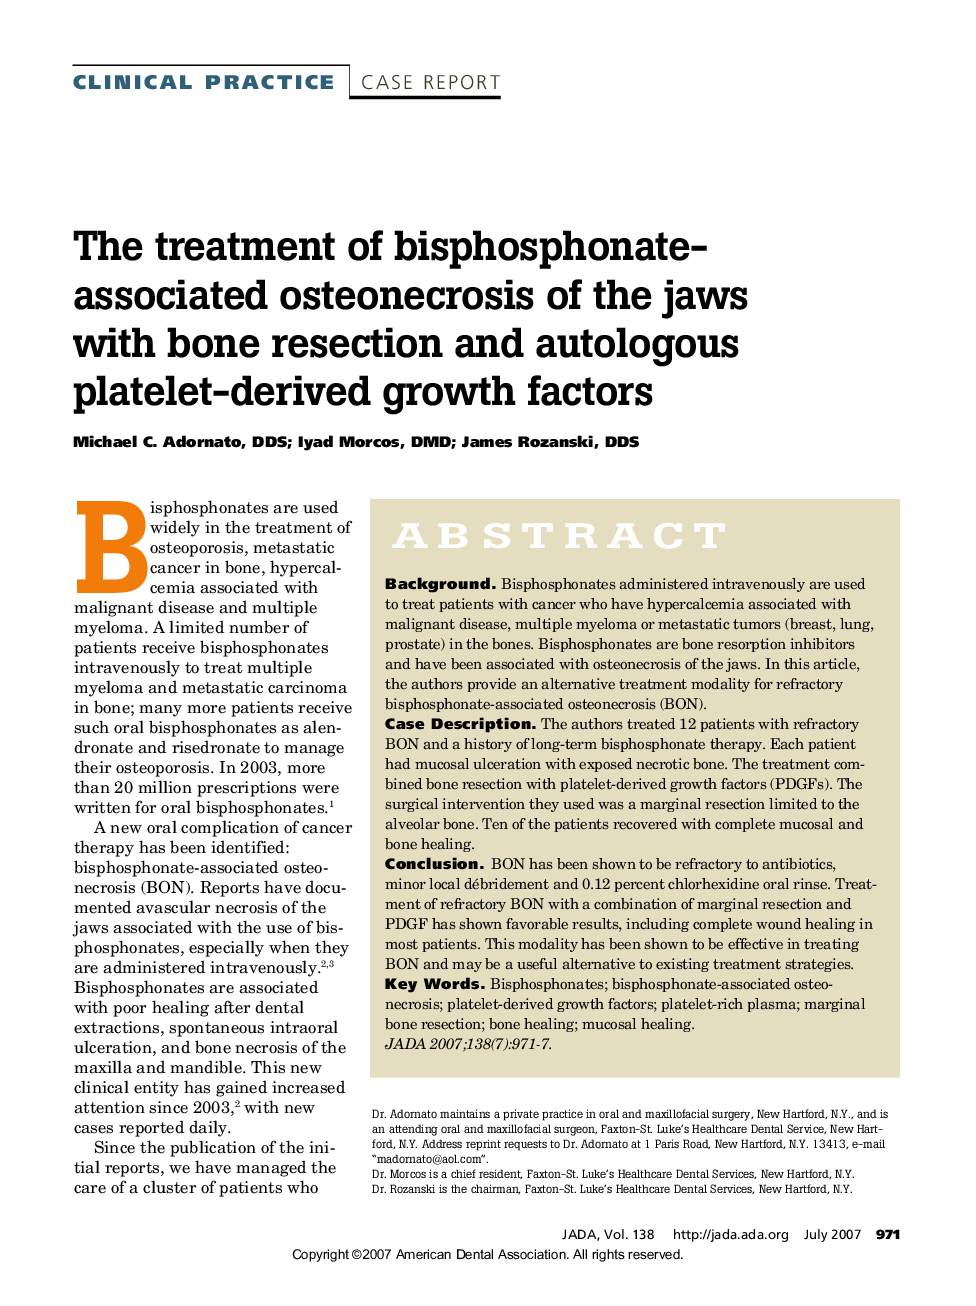 The treatment of bisphosphonate-associated osteonecrosis of the jaws with bone resection and autologous platelet-derived growth factors